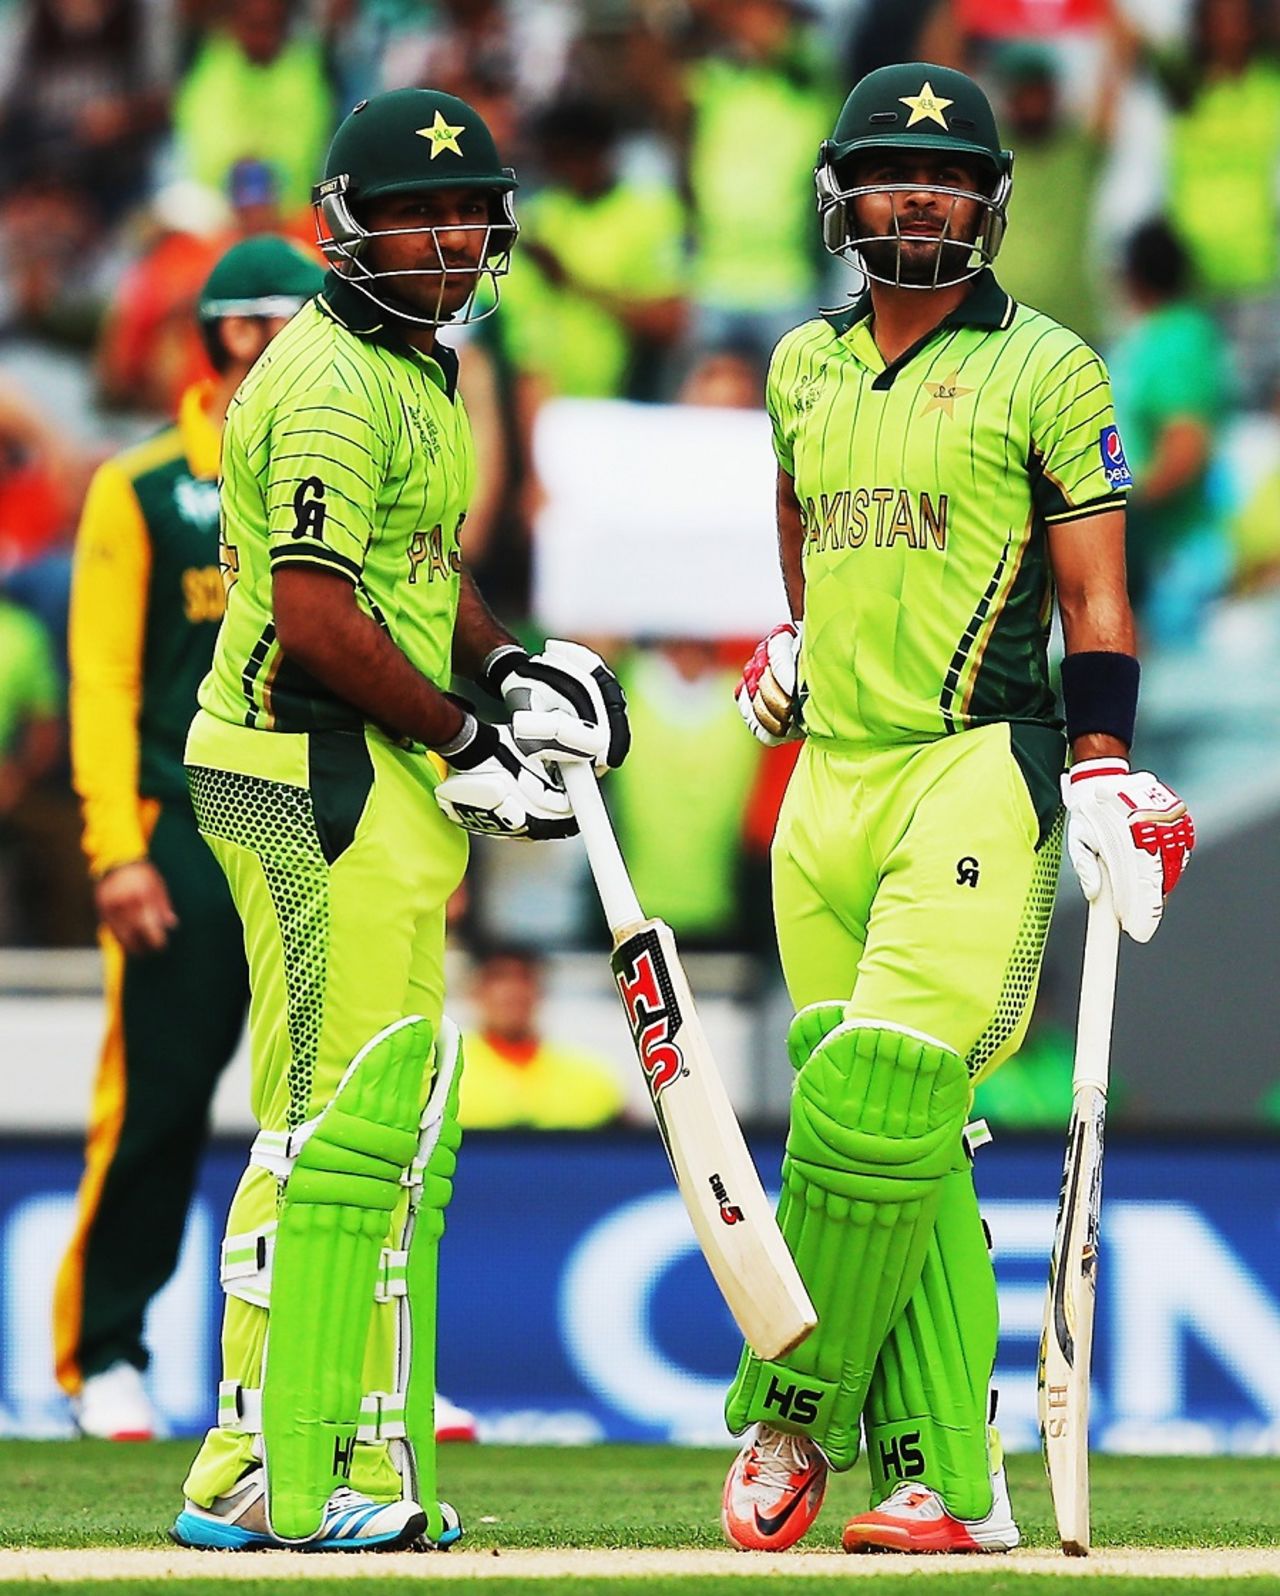 Sarfraz Ahmed and Ahmed Shehzad added 30 together, Pakistan v South Africa, World Cup 2015, Group B, Auckland, March 7, 2015